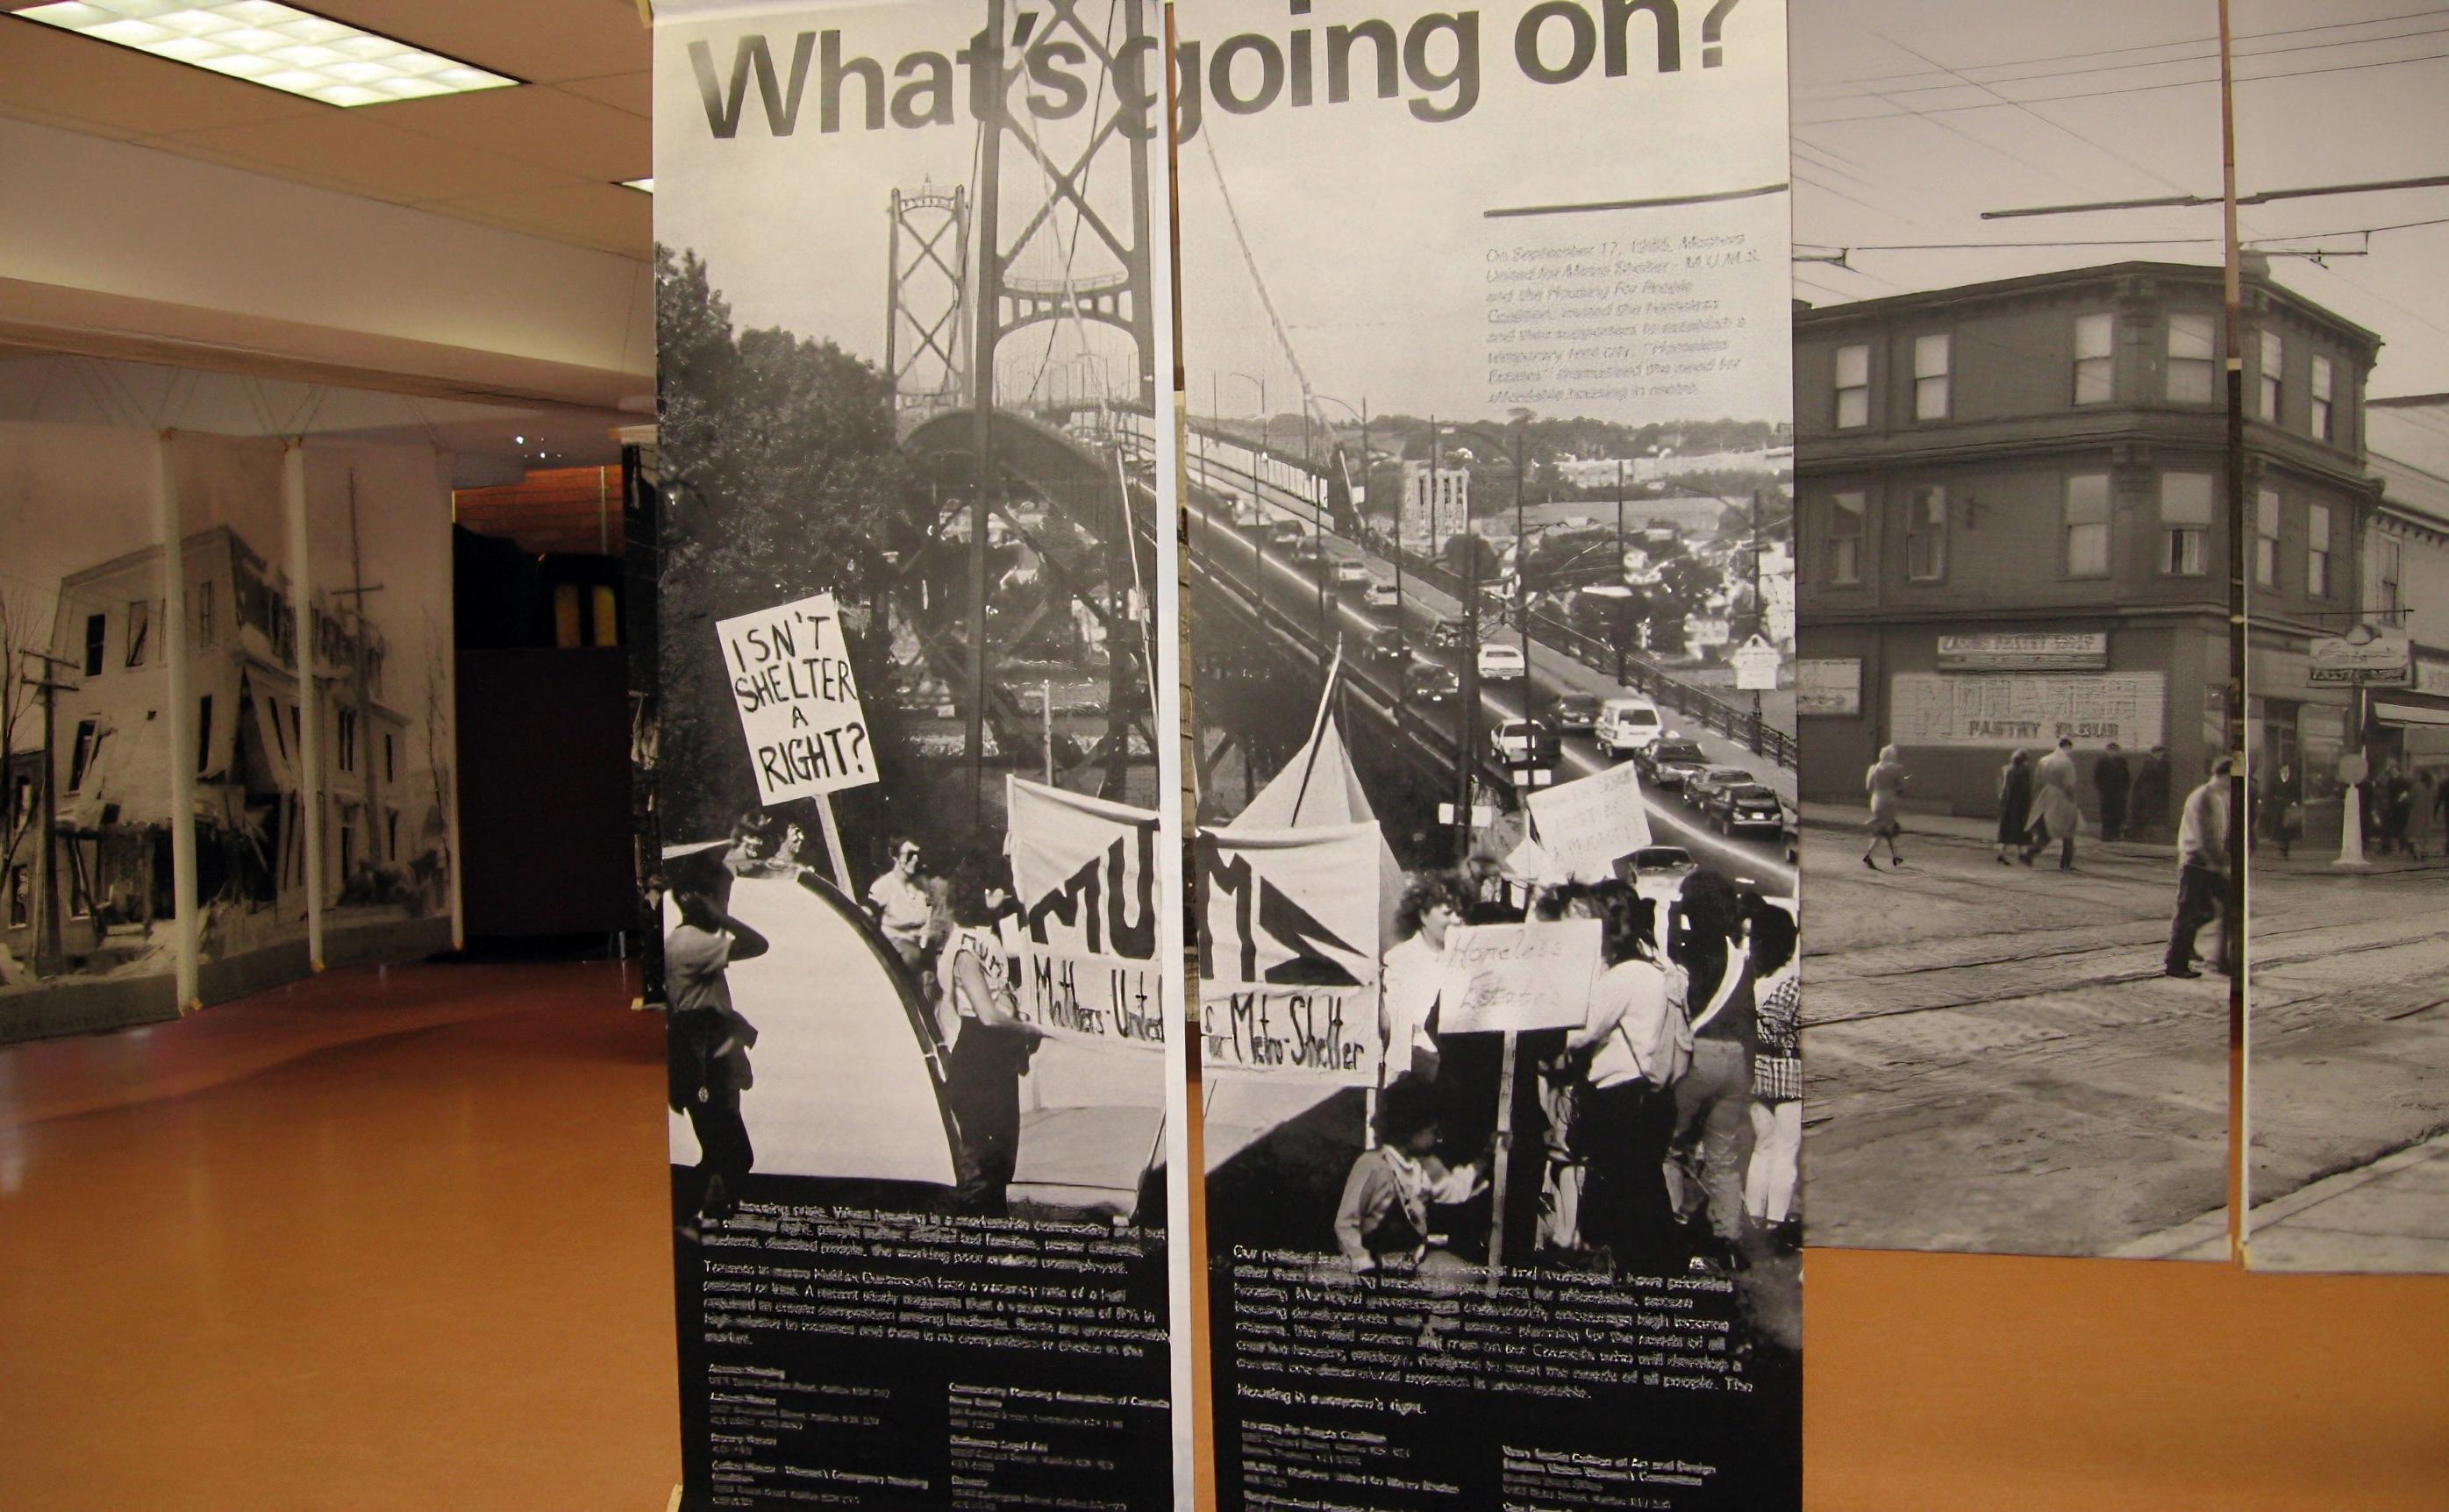 What's Going On?, Halifax Poster Project, Halifax, 1986 and 2006